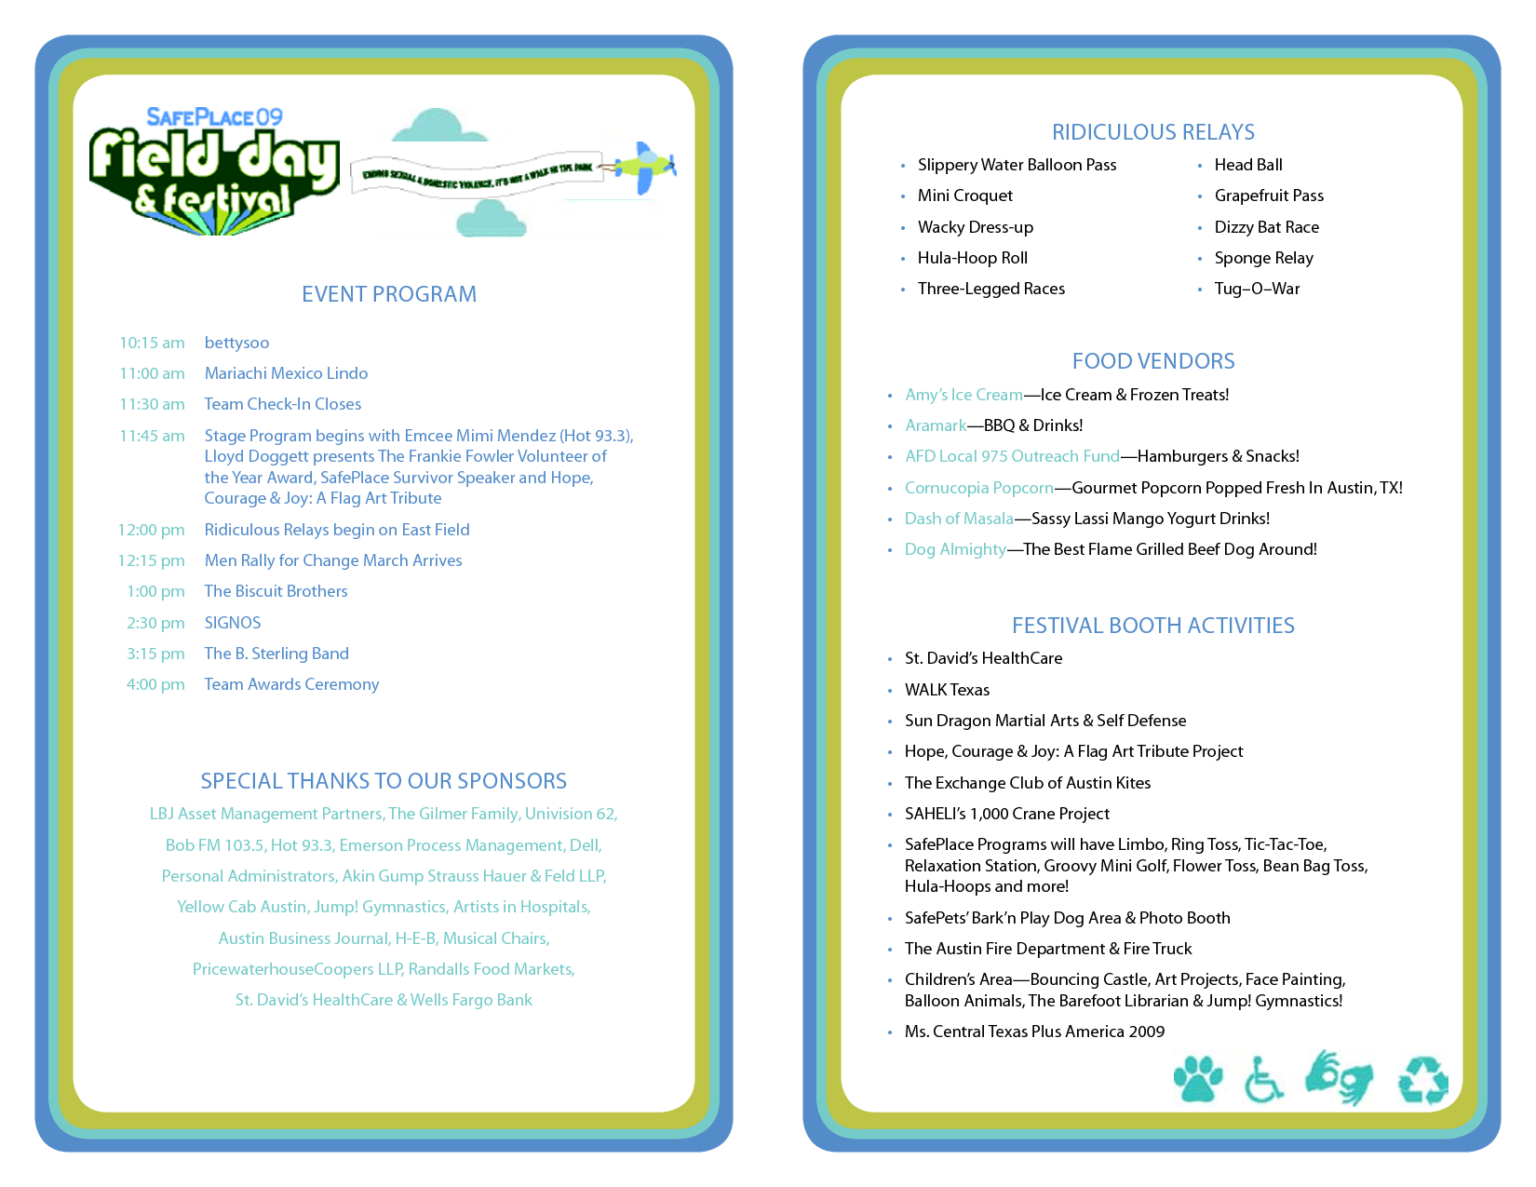 029 Sample Event Program Template 1926 Free Printable within Free Event